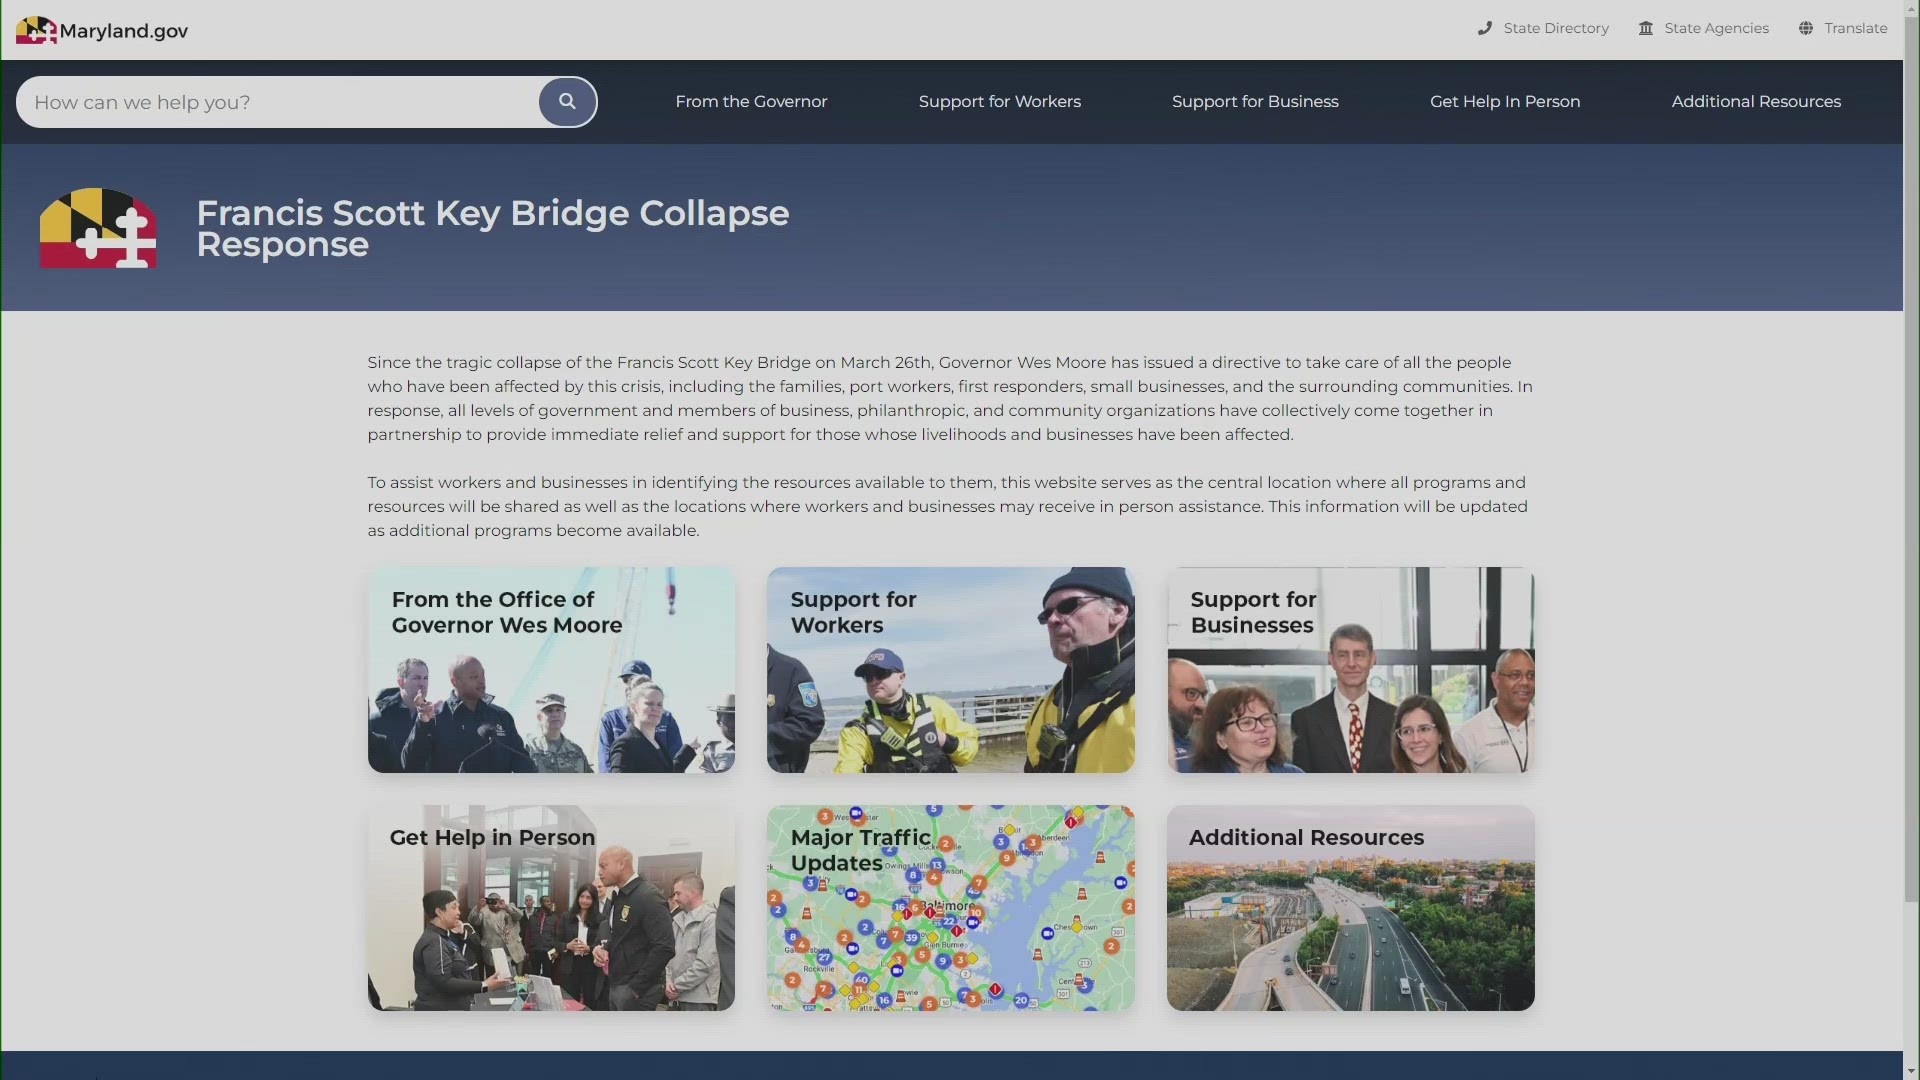 The site includes resources for impacted workers and businesses, as well as traffic updates.